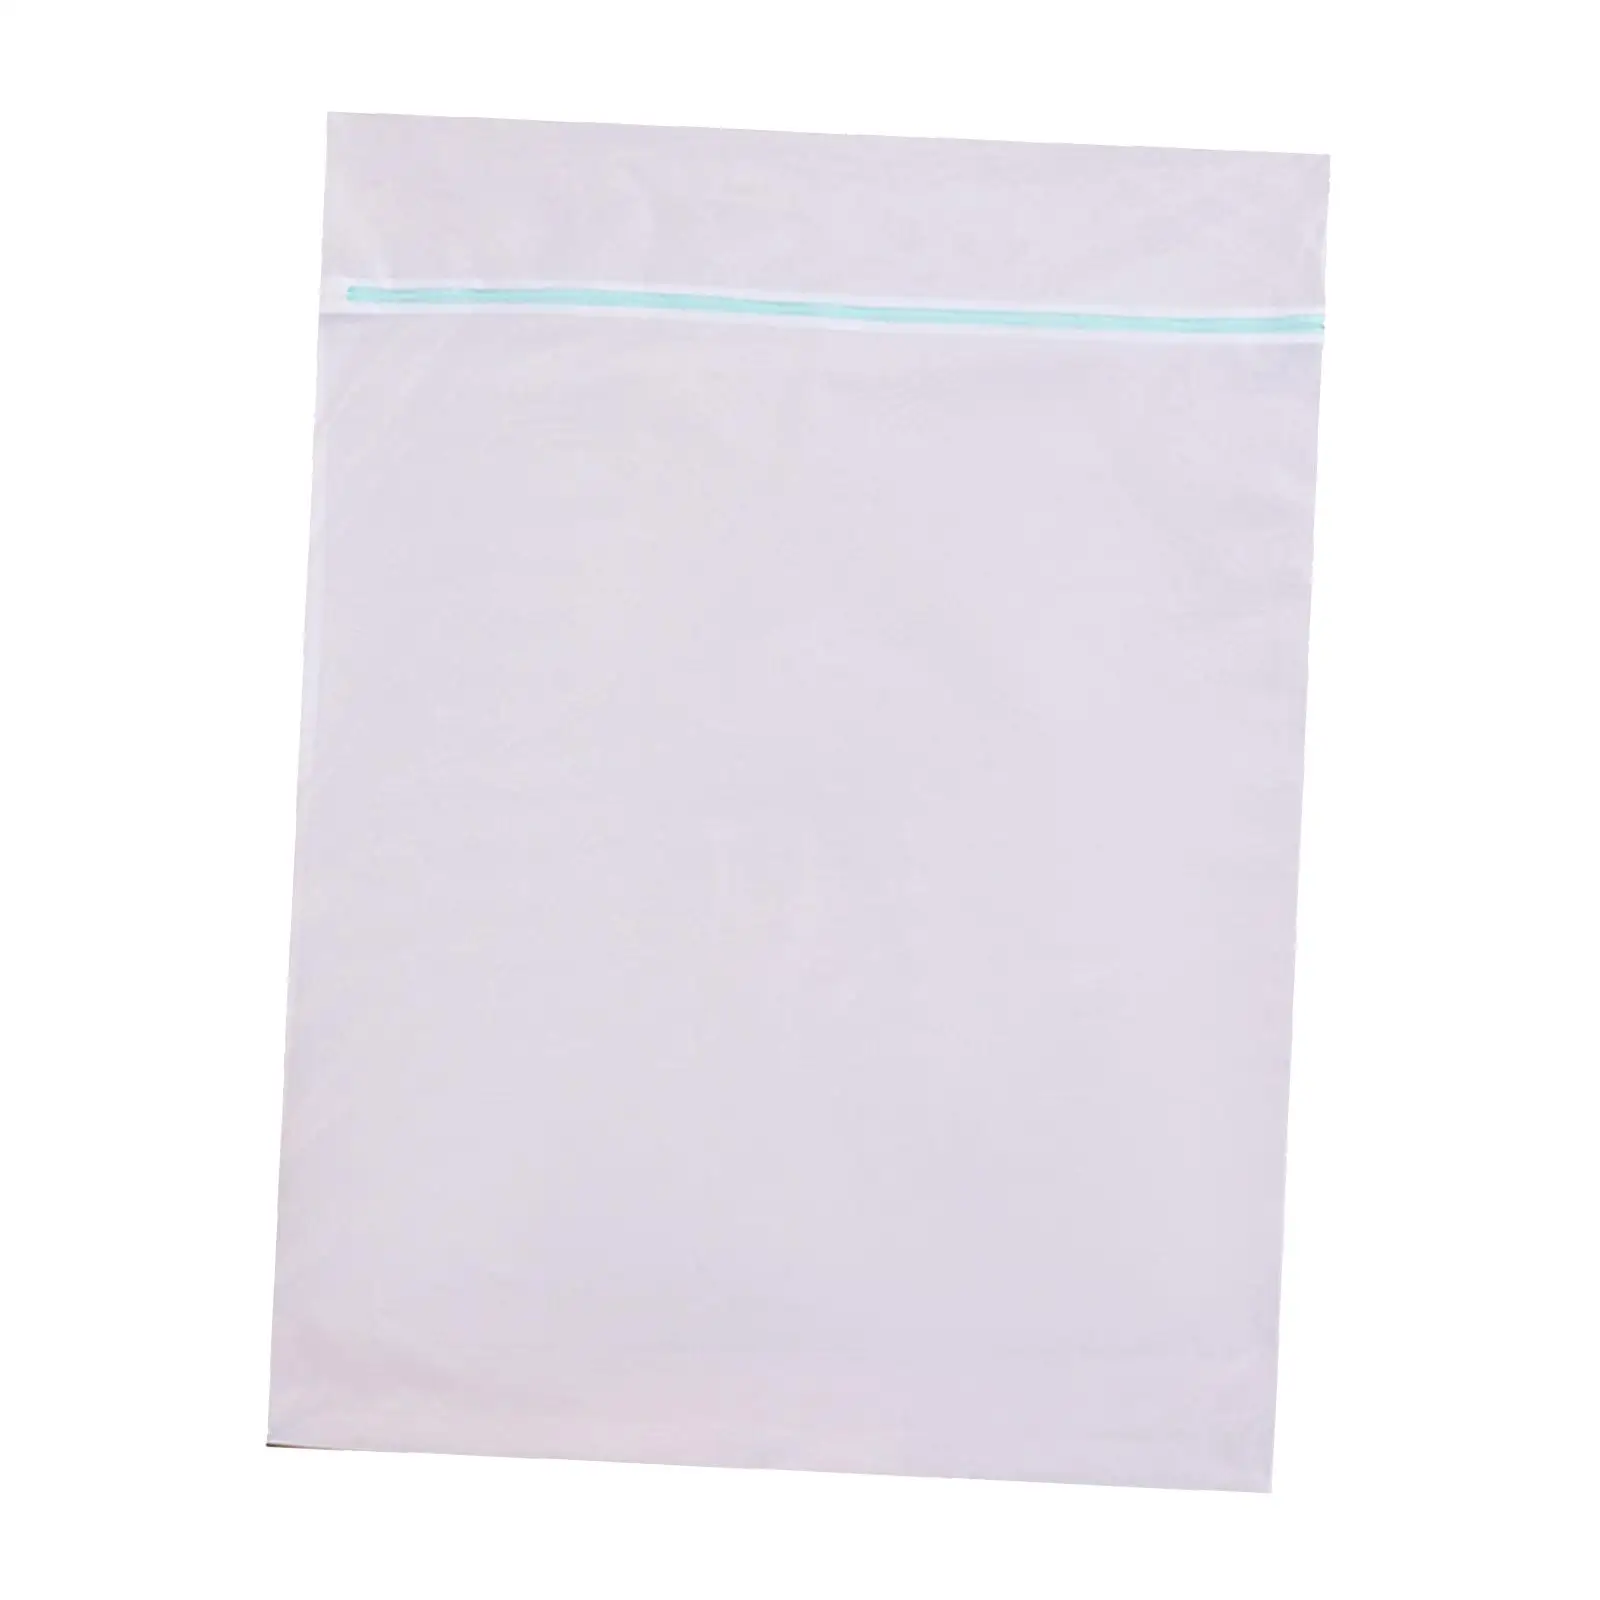 Laundry Bags for for Large Items Protective with Zipper Reusable 90x110cm Polyester Zippered Garment Washing Net Organizer